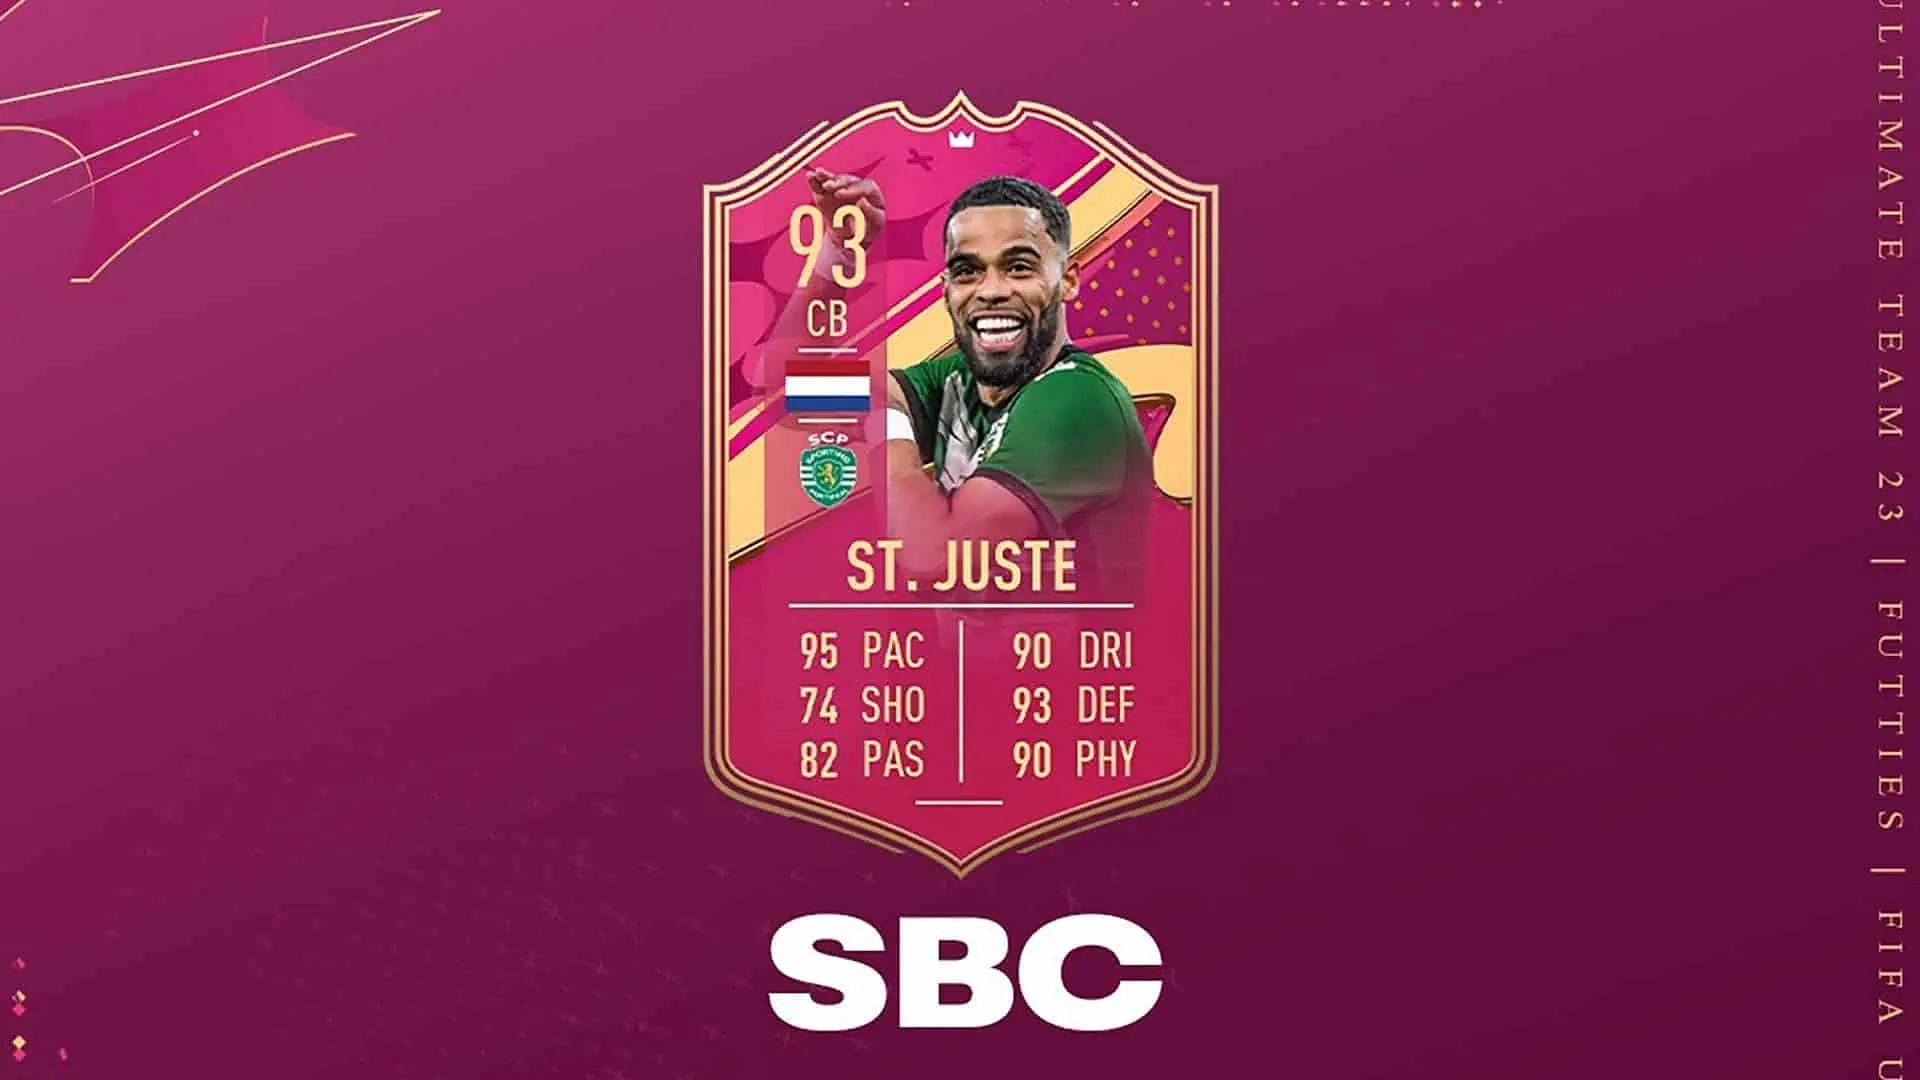 The St. Juste Futties SBC is now live in FIFA 23 (Image via EA Sports)